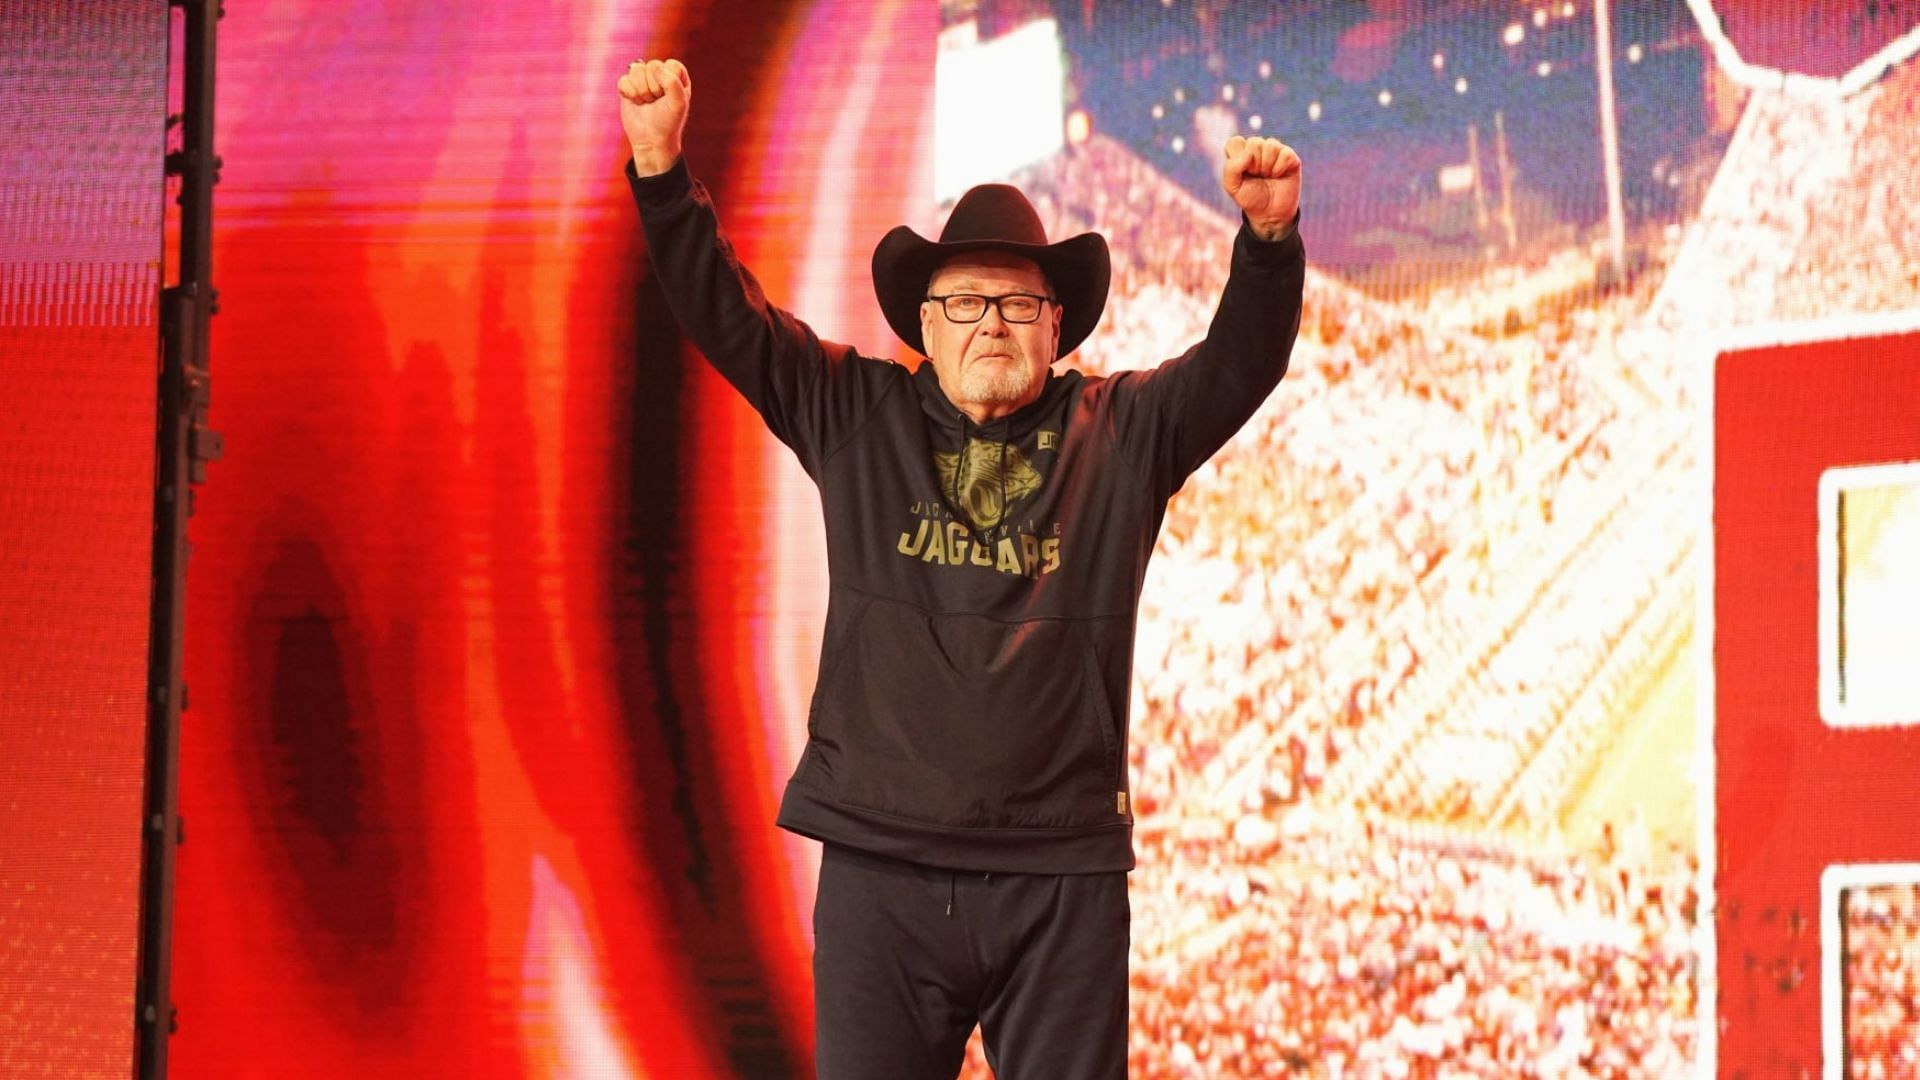 Jim Ross has been a commentator for AEW since 2019